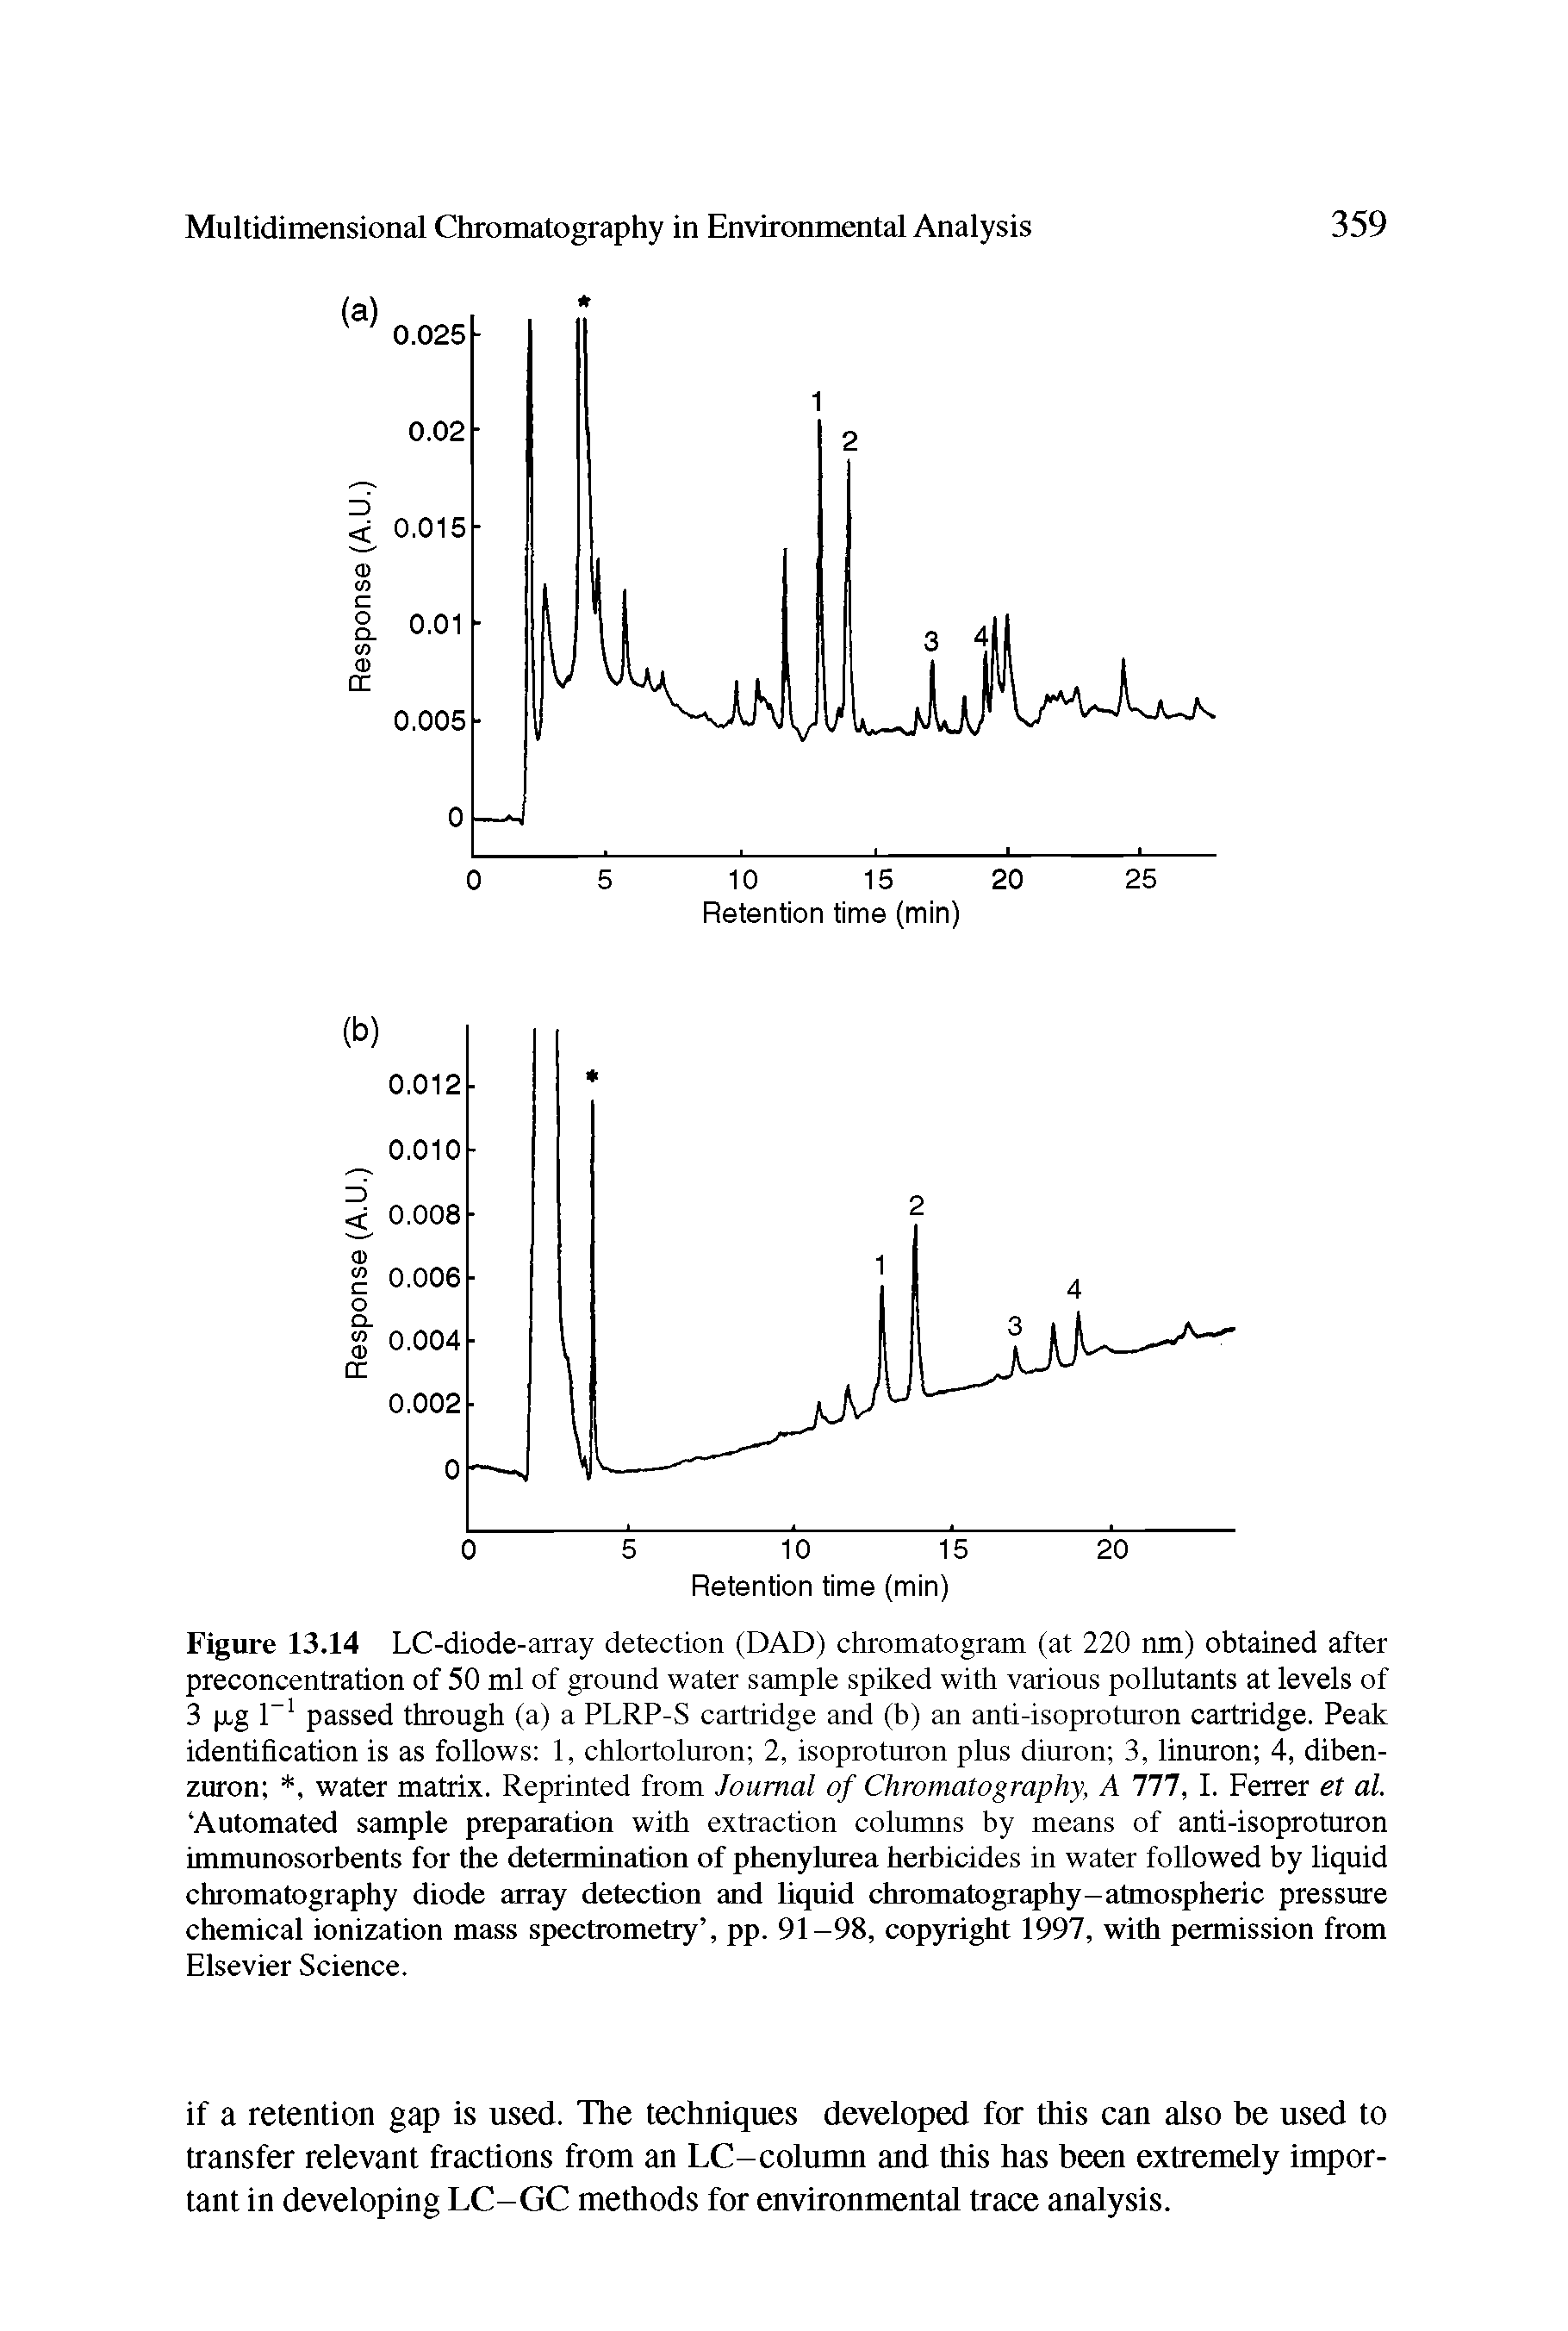 Figure 13.14 LC-diode-array detection (DAD) chromatogram (at 220 nm) obtained after preconcentration of 50 ml of ground water sample spiked with various pollutants at levels of 3 p.g l-1 passed through (a) a PLRP-S cartridge and (b) an anti-isoproturon cartridge. Peak identification is as follows 1, chlortoluron 2, isoproturon plus diuron 3, linuron 4, diben-zuron , water matrix. Reprinted from Journal of Chromatography, A 777, I. Ferrer et al. Automated sample preparation with extraction columns by means of anti-isoproturon immunosorbents for the determination of phenylurea herbicides in water followed by liquid chromatography diode array detection and liquid chromatography-atmospheric pressure chemical ionization mass spectrometry , pp. 91-98, copyright 1997, with permission from Elsevier Science.